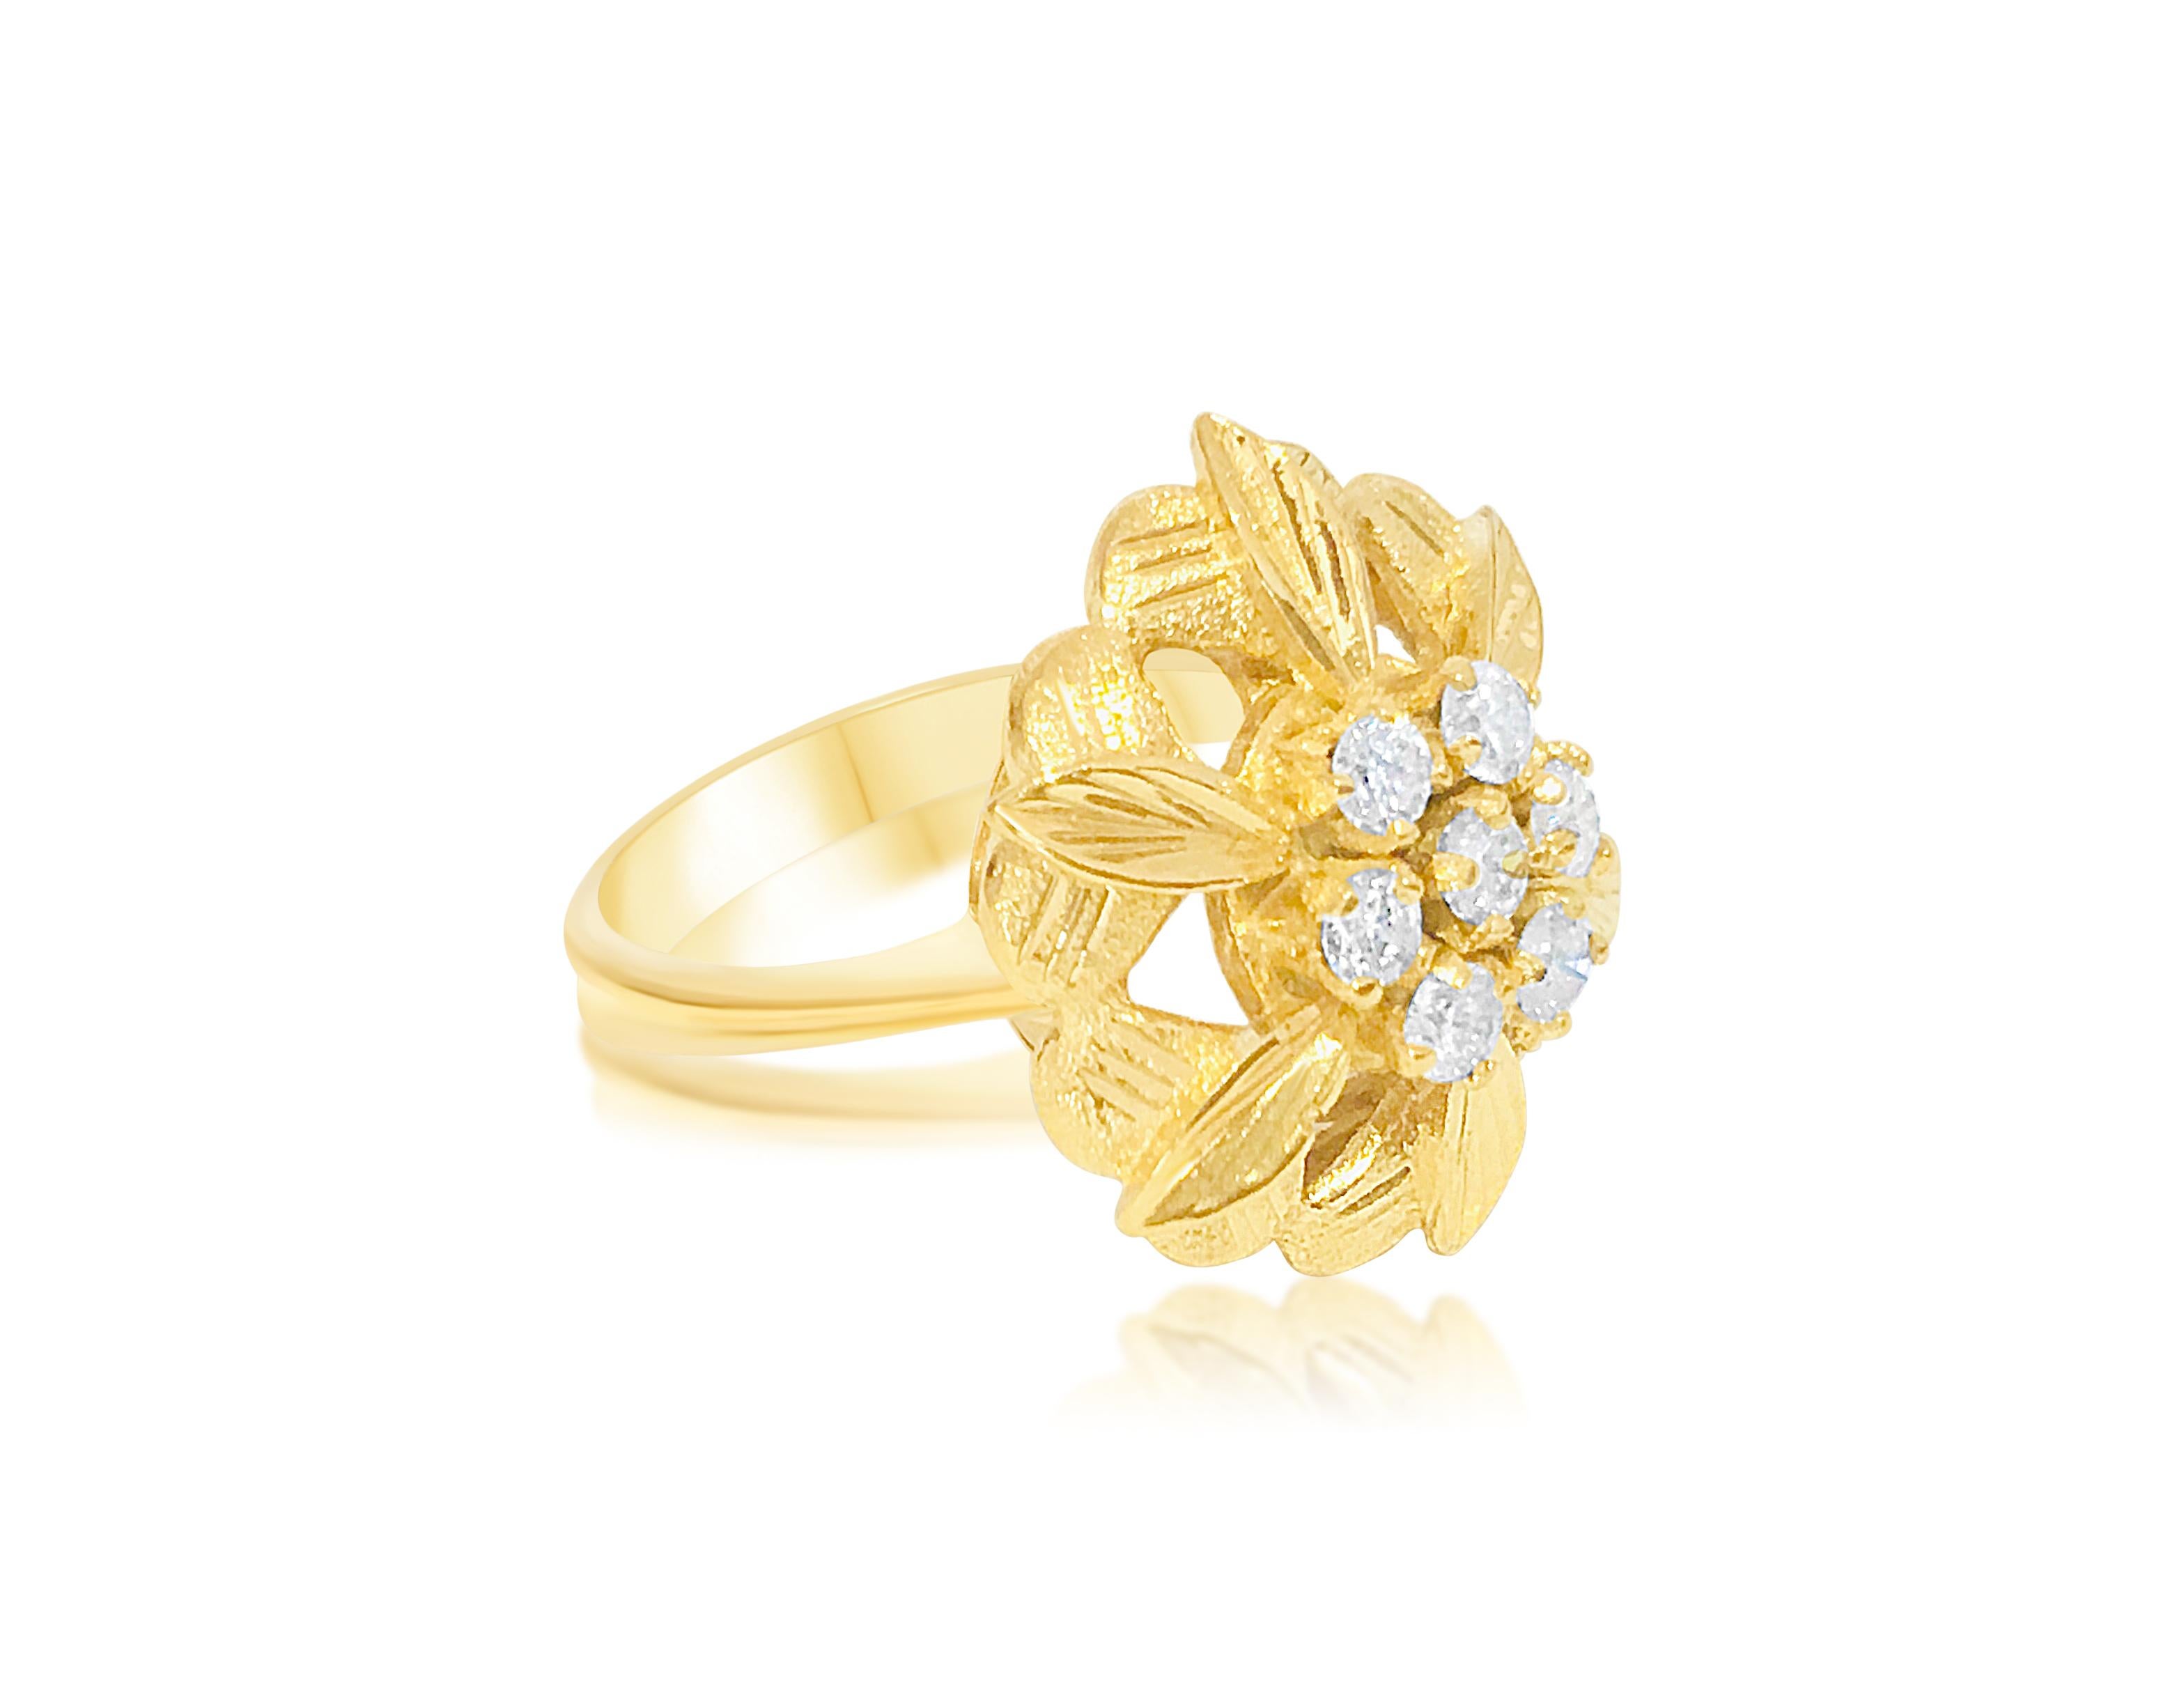 Behold a stunning ensemble of 18K yellow gold adorned with 0.38 carat natural diamonds boasting SI clarity and F-G color. This collection boasts exquisite craftsmanship and vintage-inspired elegance.

Key Features:

Material: 18K yellow